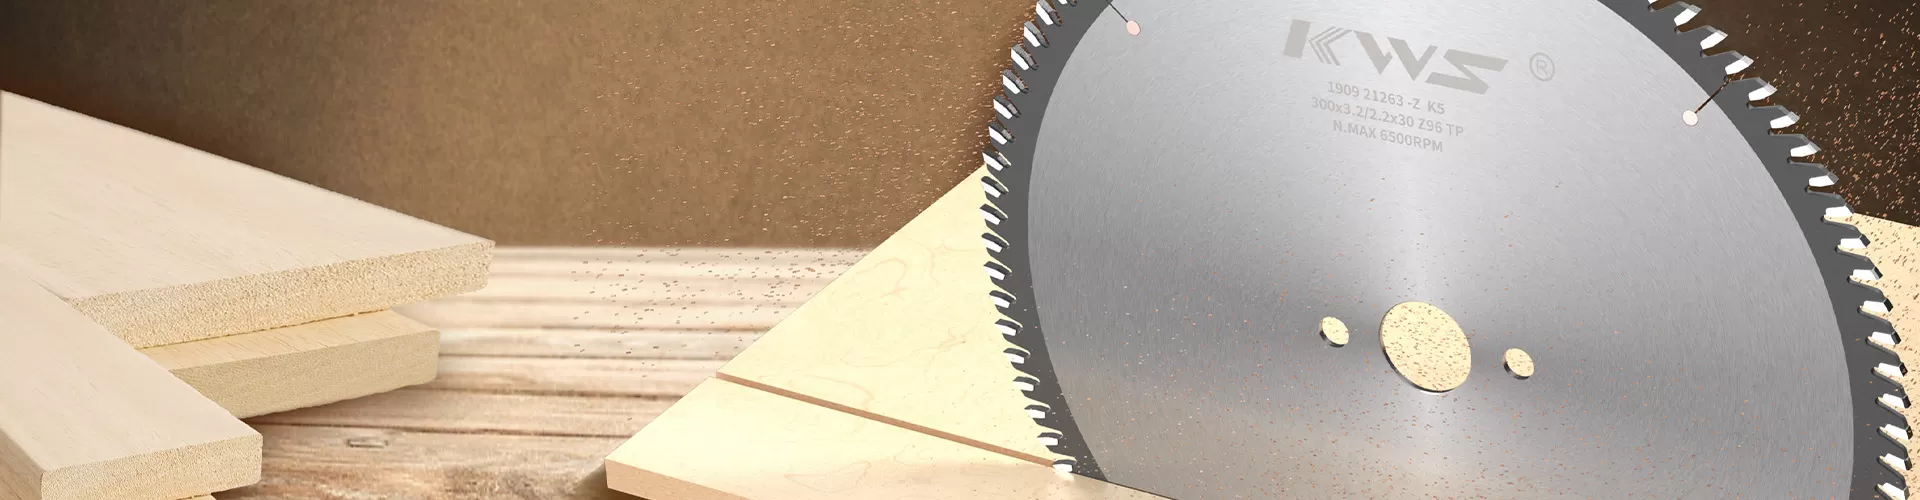 Multiripping Saw Blade with Rakers